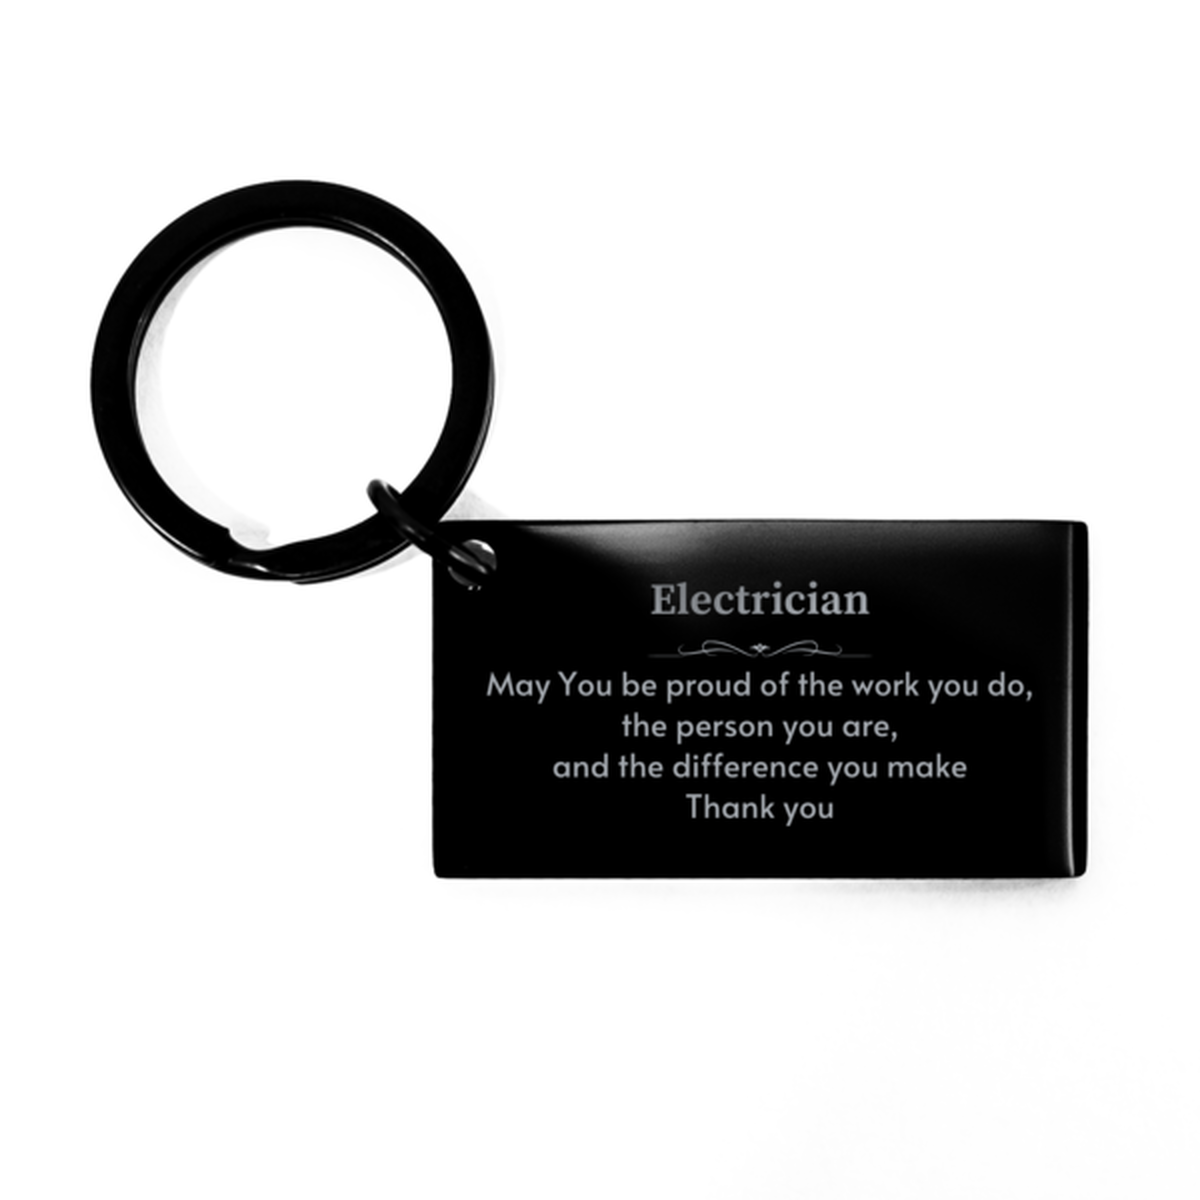 Heartwarming Keychain Retirement Coworkers Gifts for Electrician, Insurance Sales Agent May You be proud of the work you do, the person you are Gifts for Boss Men Women Friends